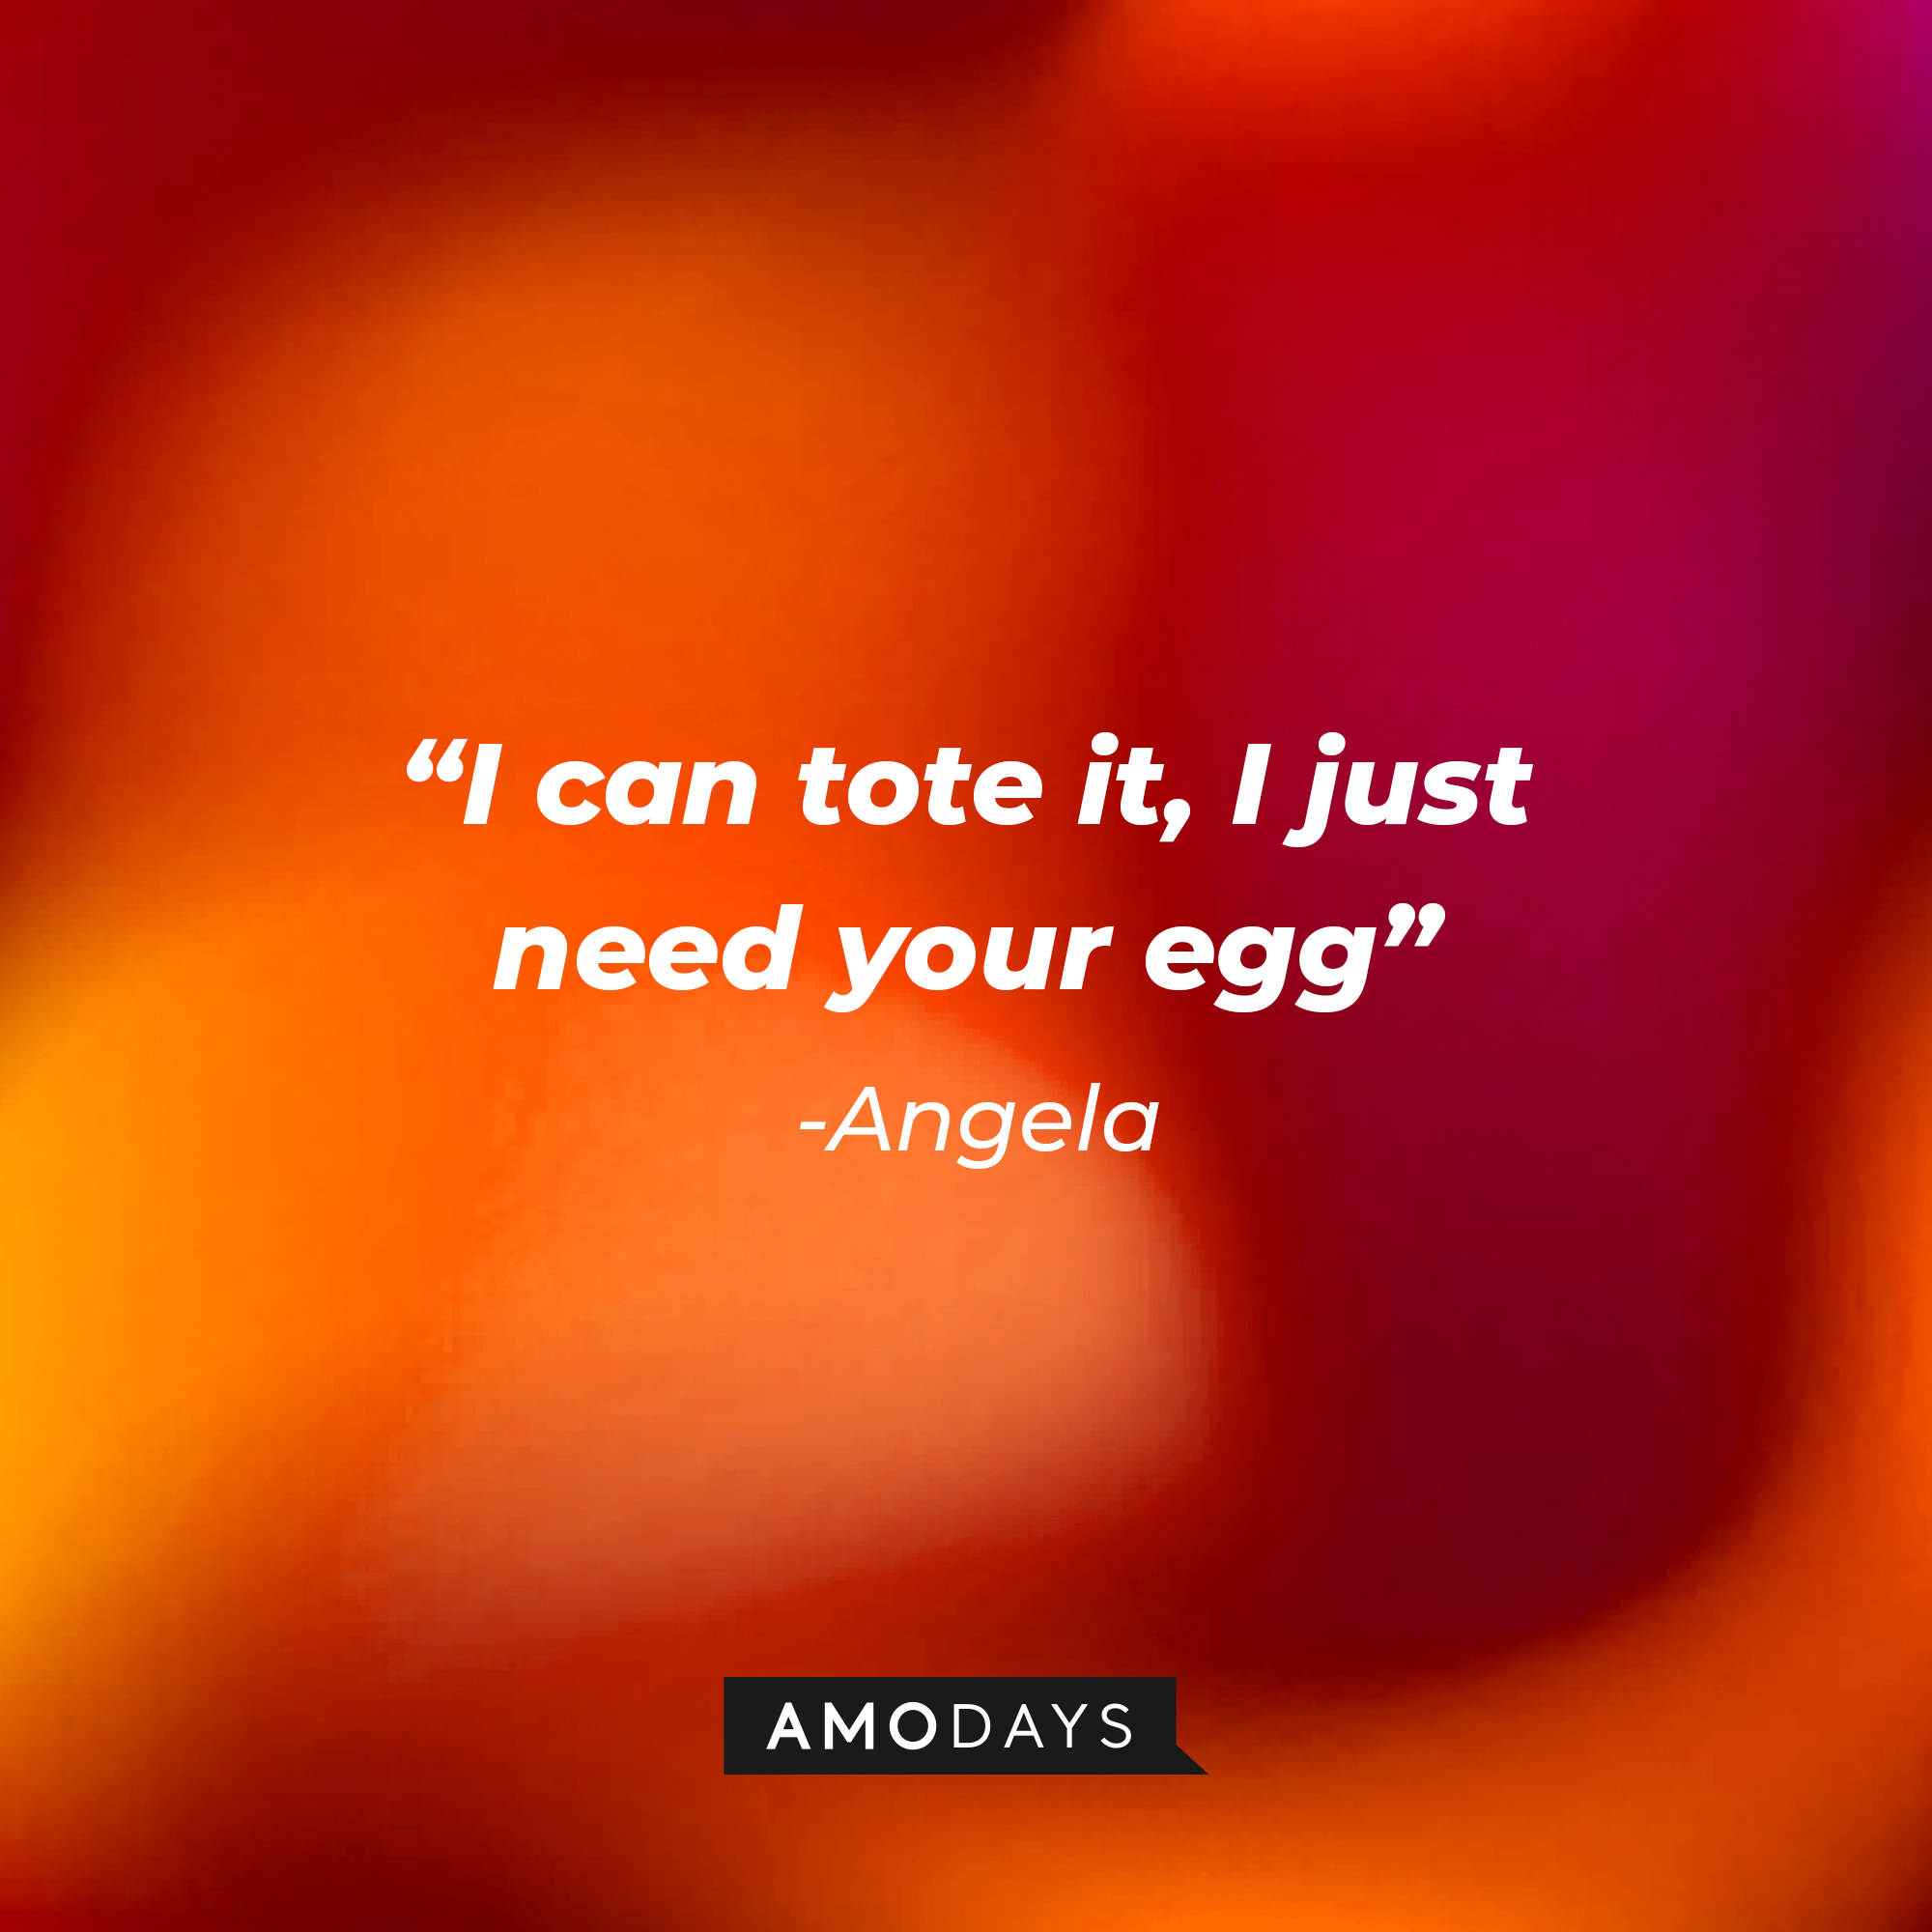 Angela's quote: "I can tote it, I just need your egg" | Source: Amodays